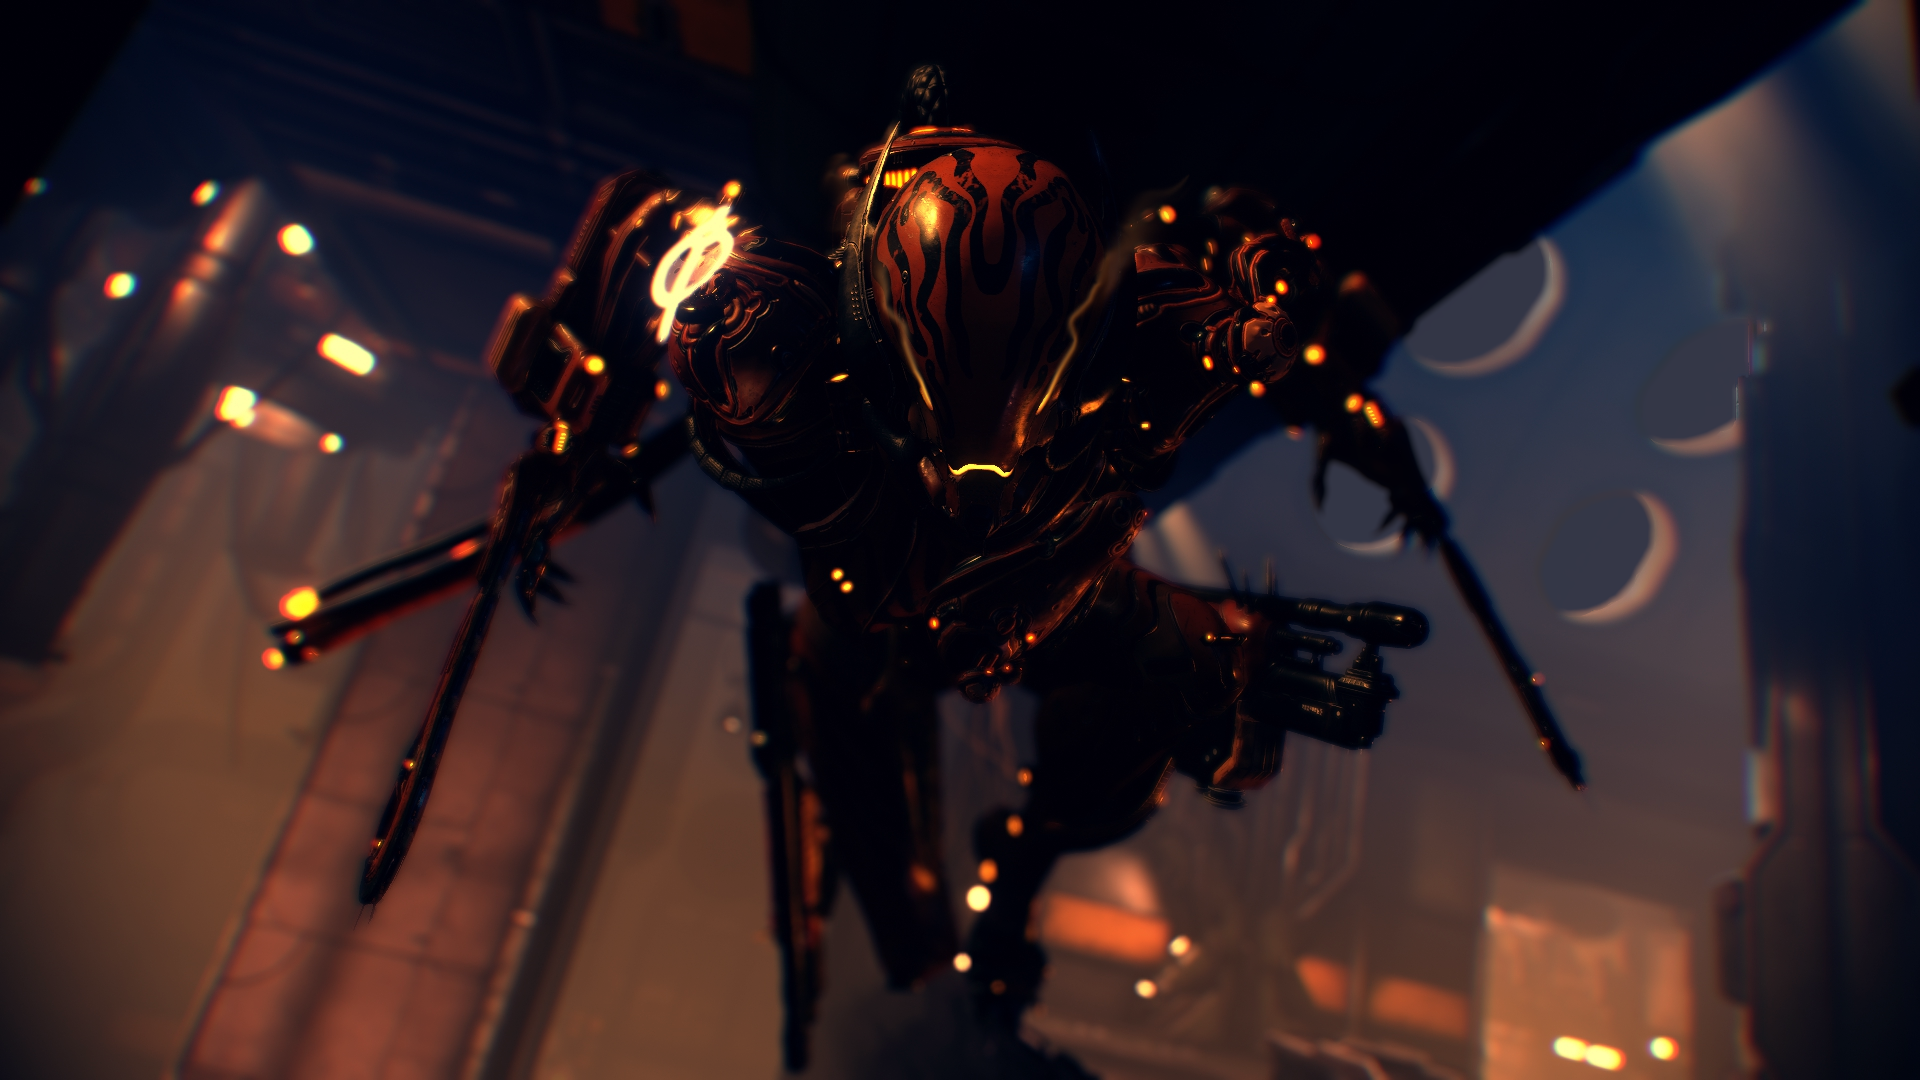 warframe___fury_by_hydrallon-dbnaah5.png